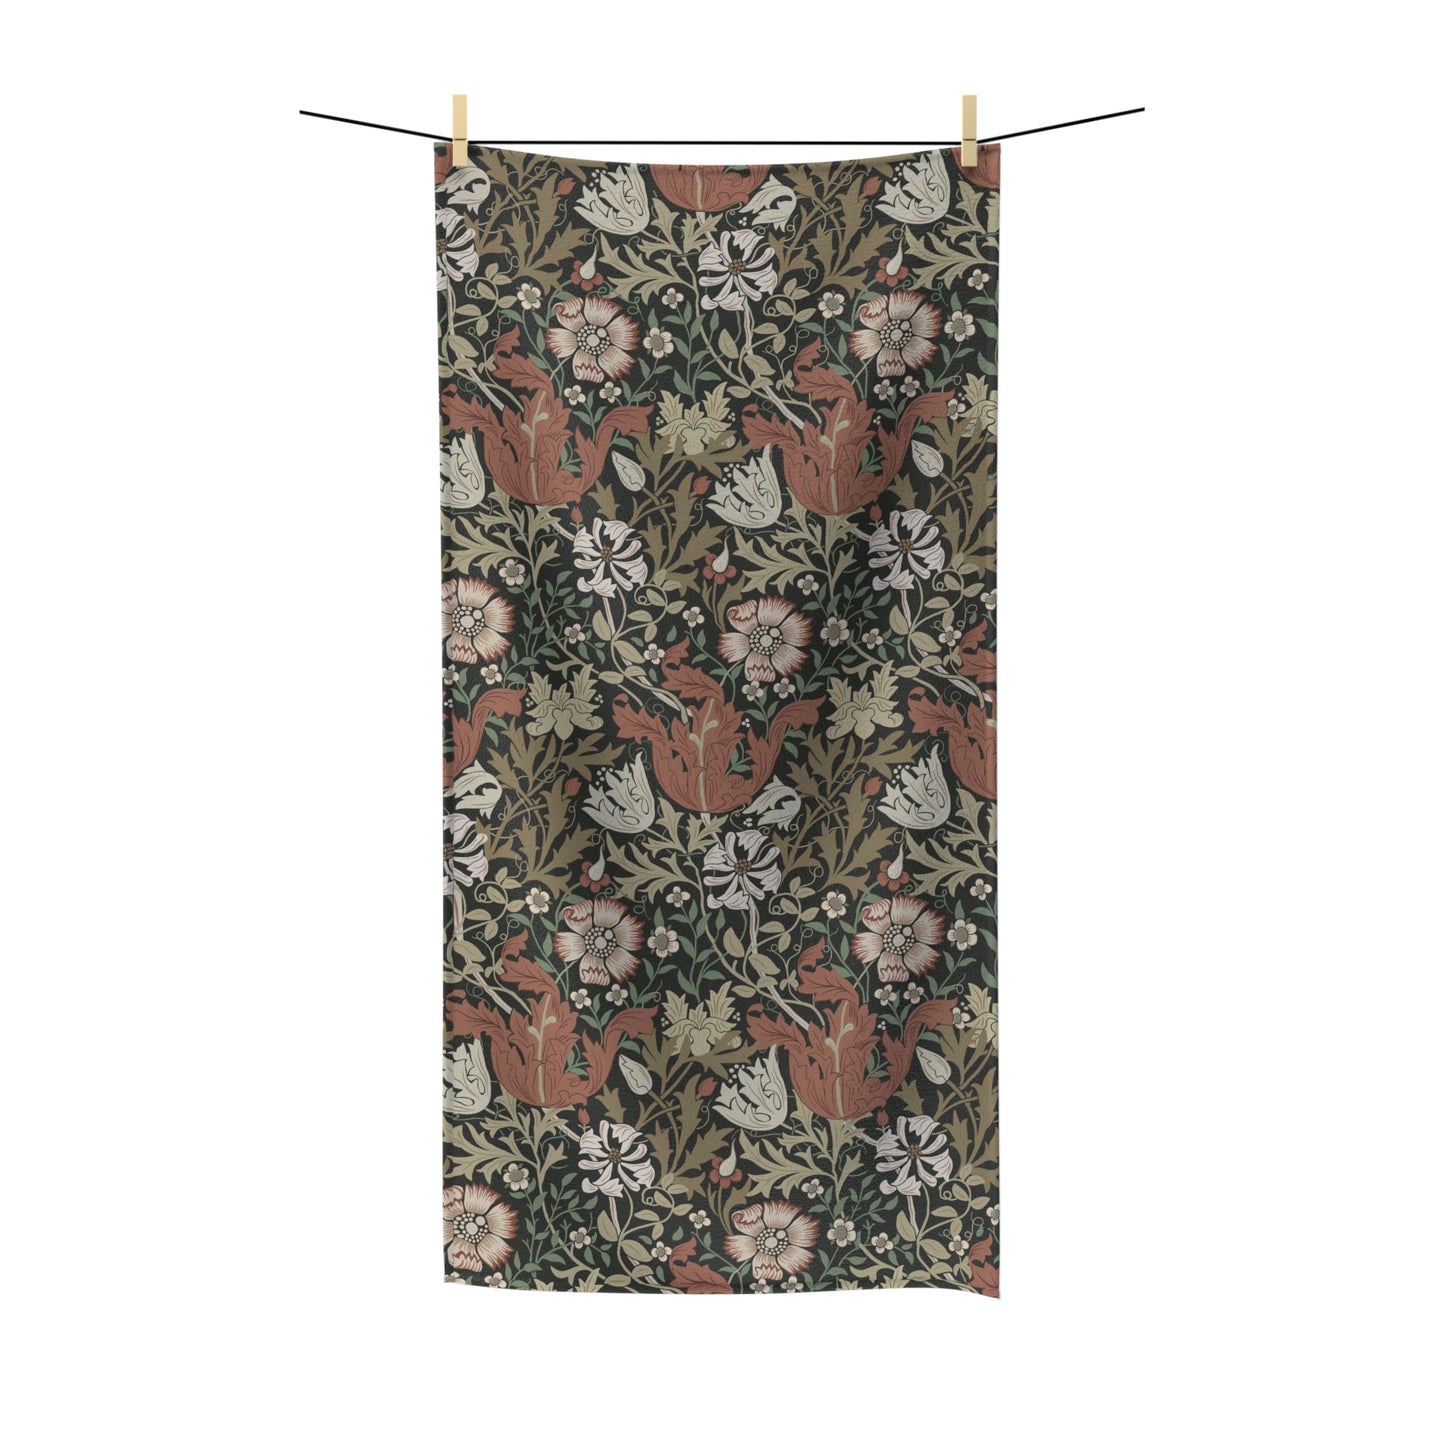 William Morris & Co Luxury Polycotton Towel - Compton Collection (Moor Cottage)